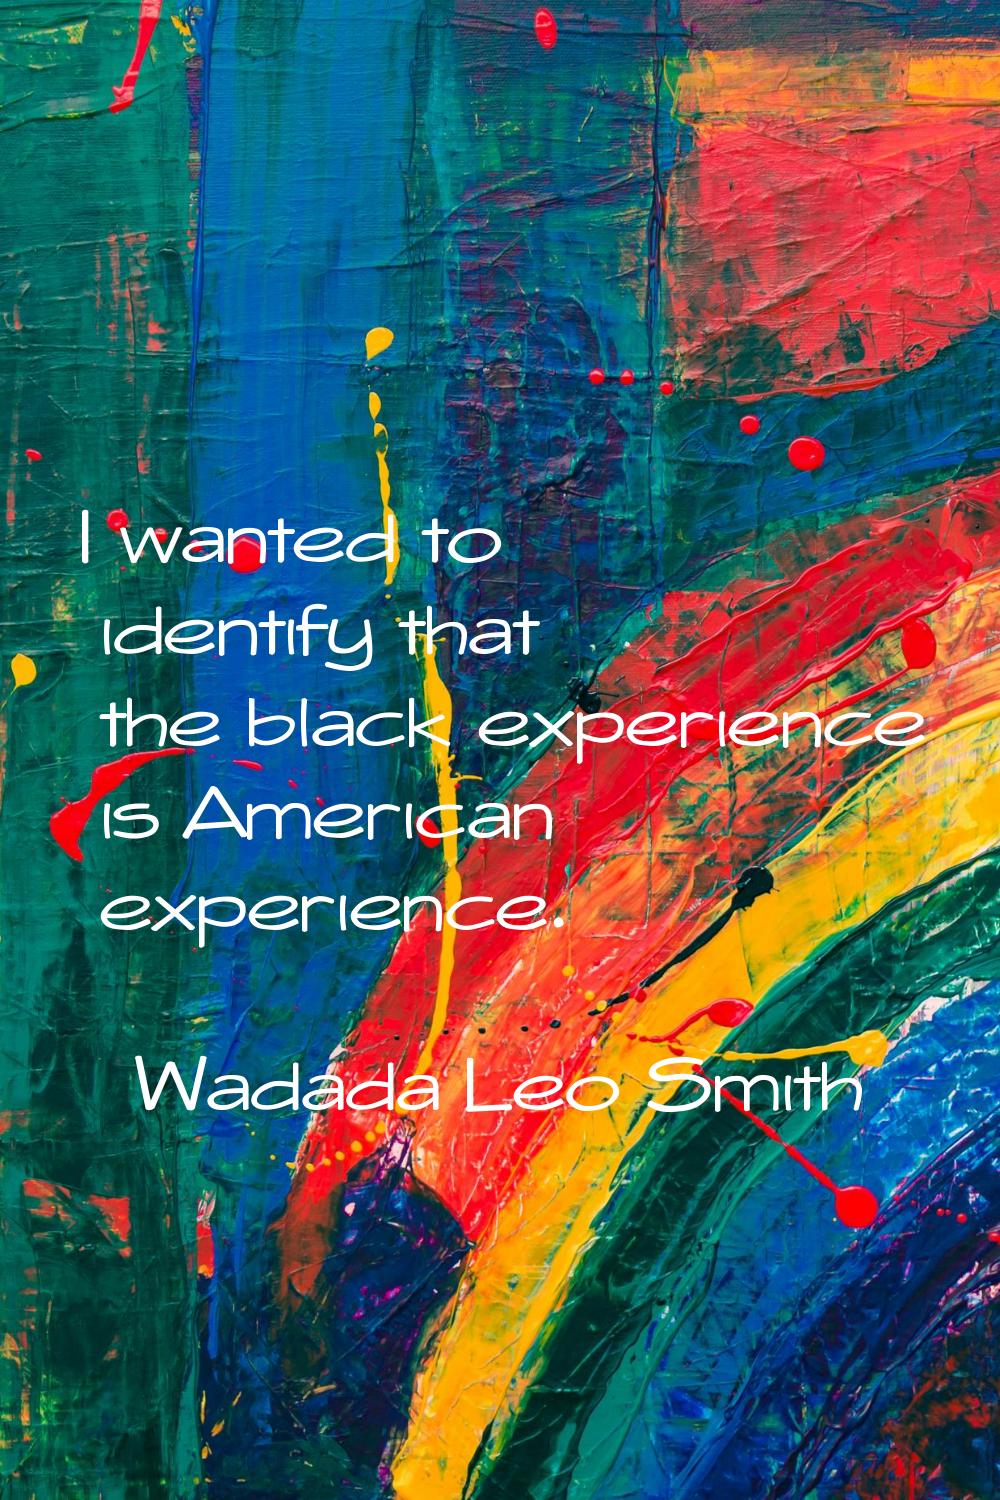 I wanted to identify that the black experience is American experience.